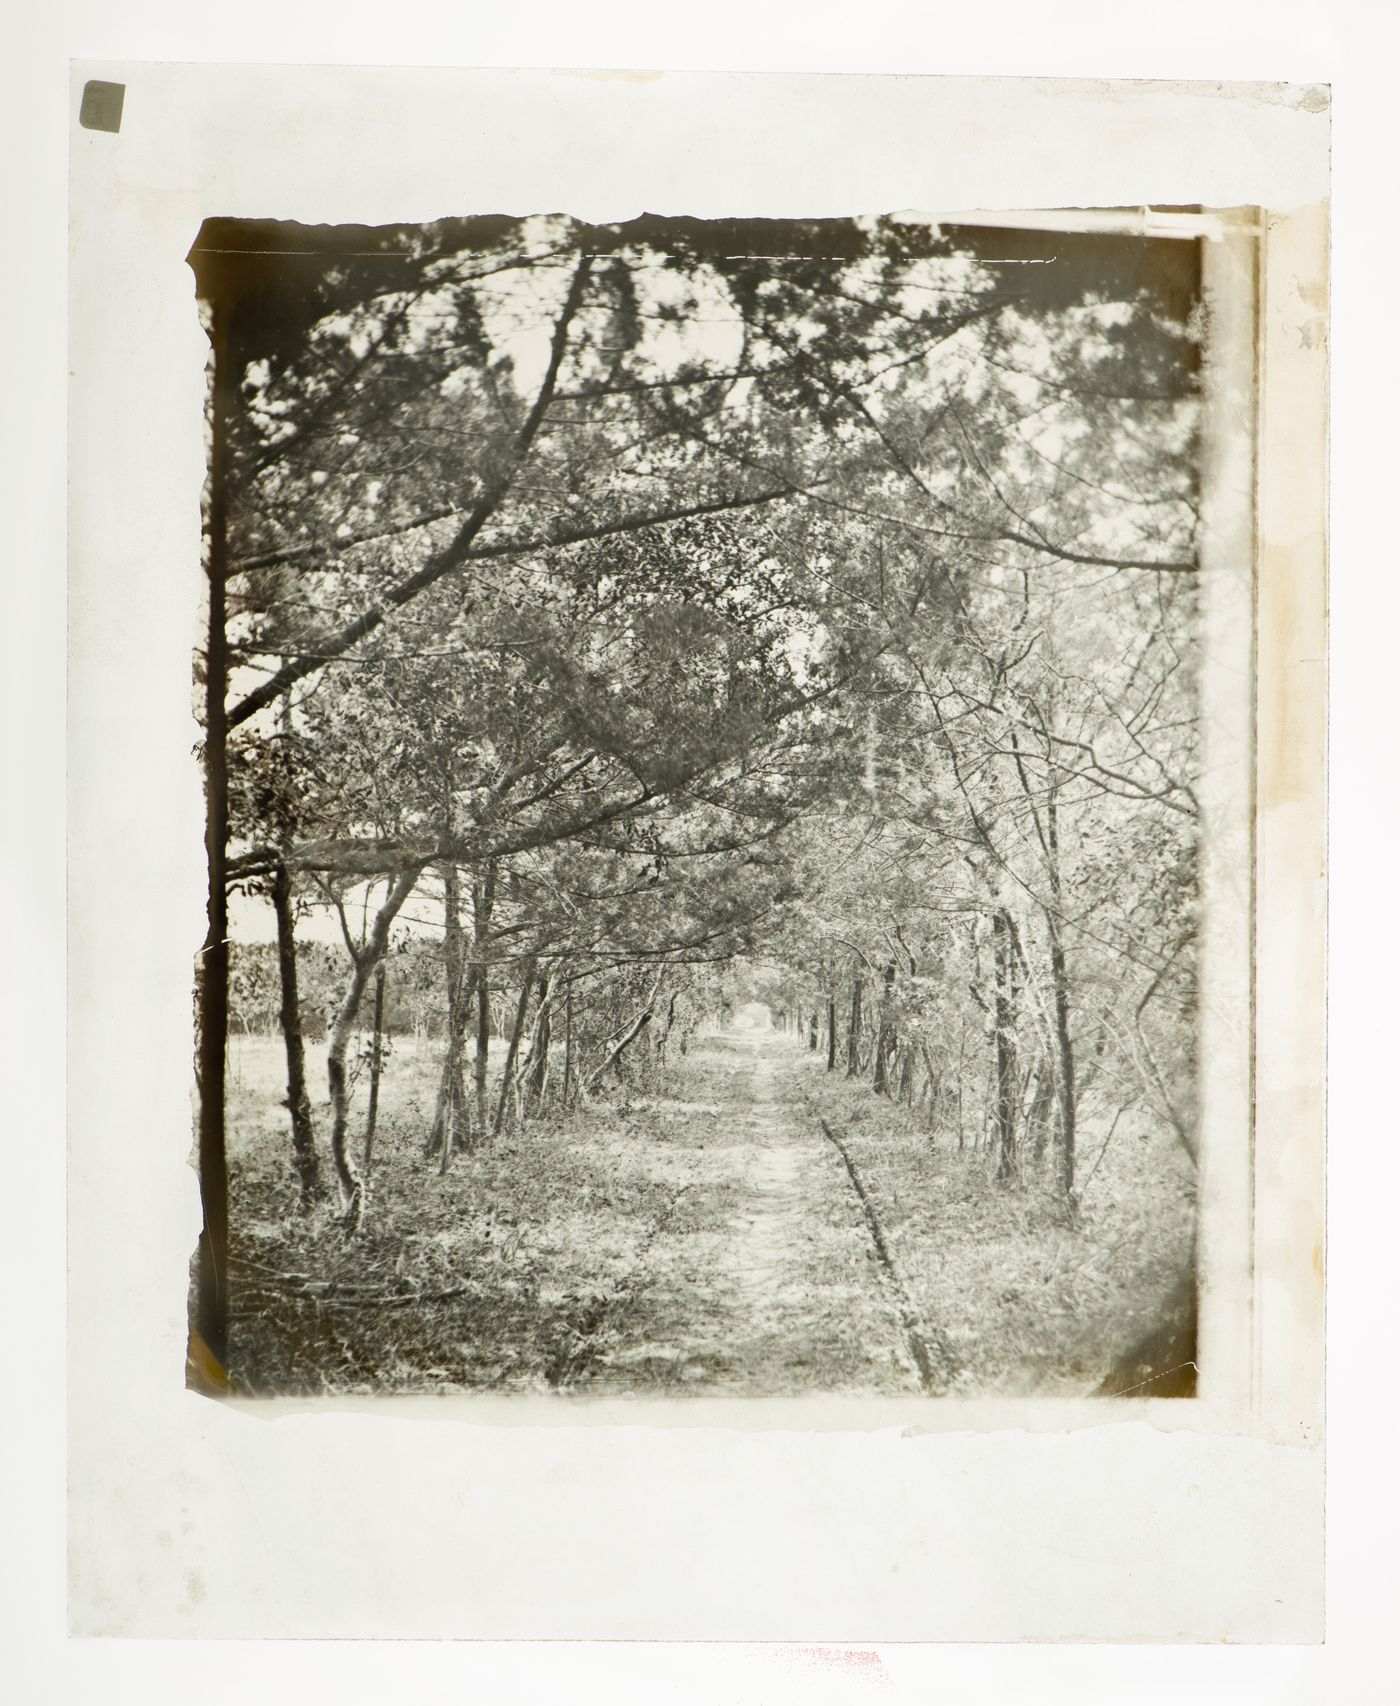 View of road with trees, (possibly) St. Ausgustine, Florida, United States of America